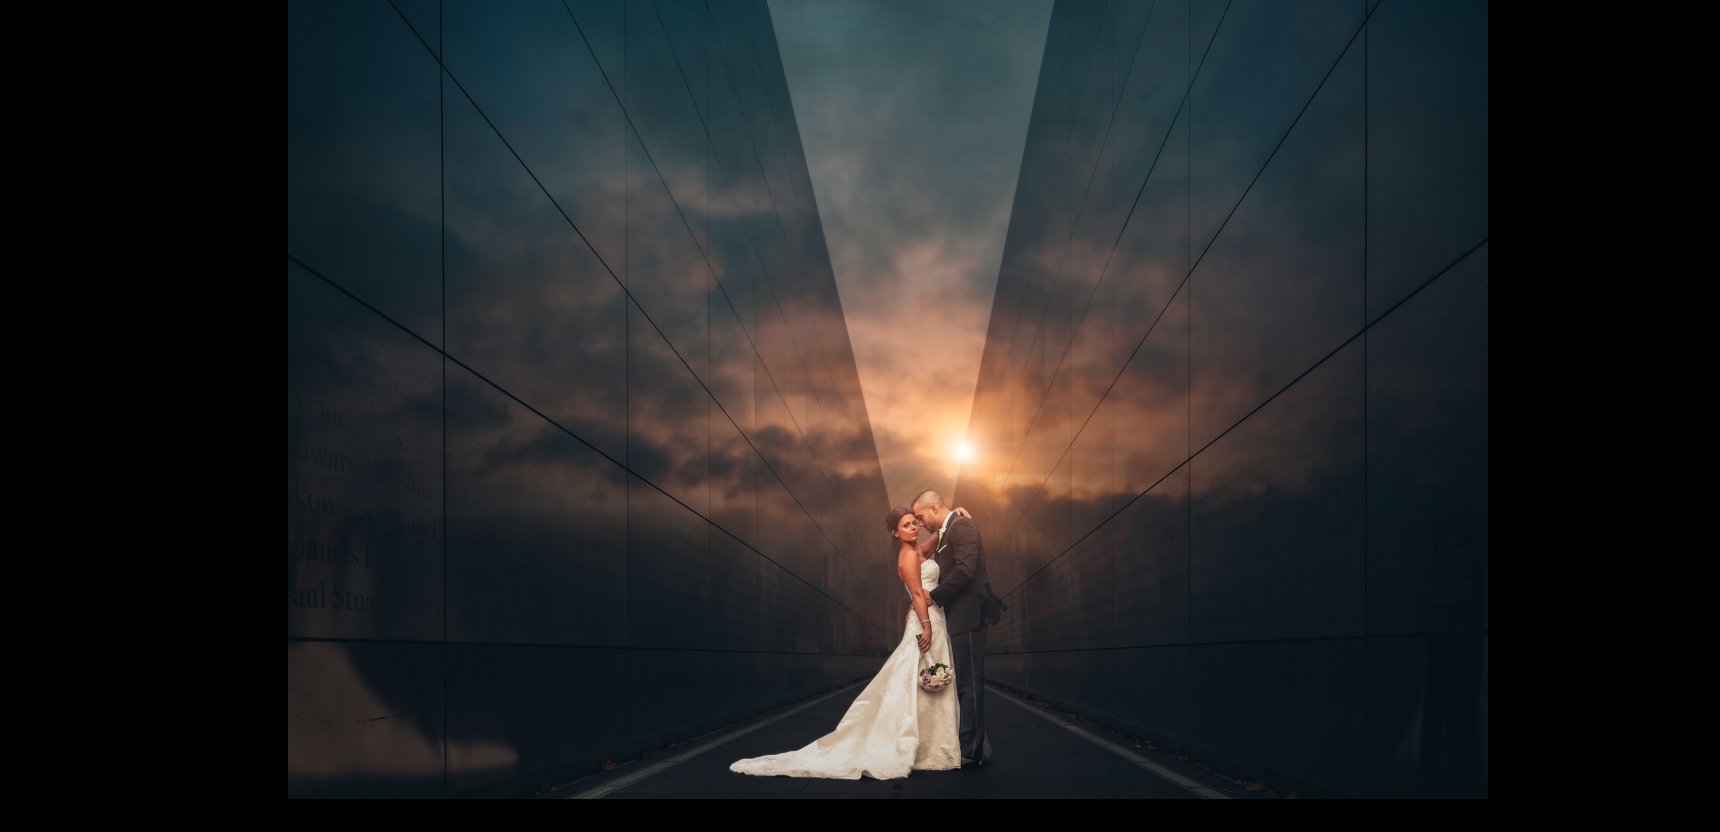 A bride and groom posing in front of a glass wall reflecting a sunset